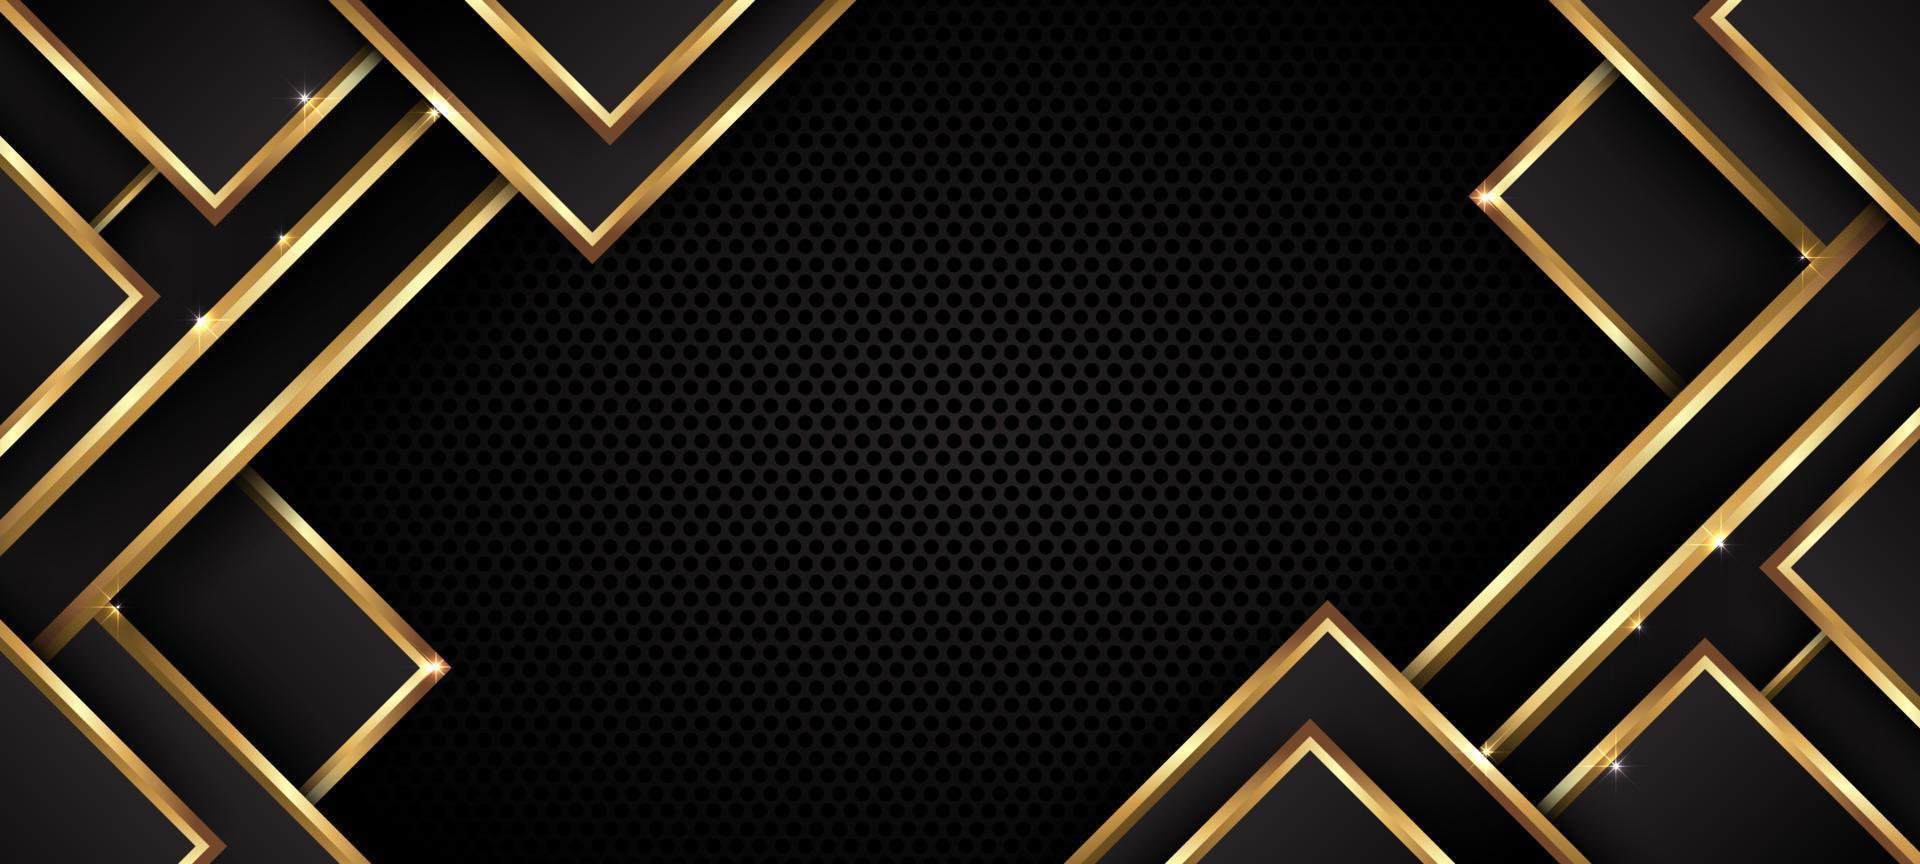 Abstract Black Triangular Background with Gold Lines vector